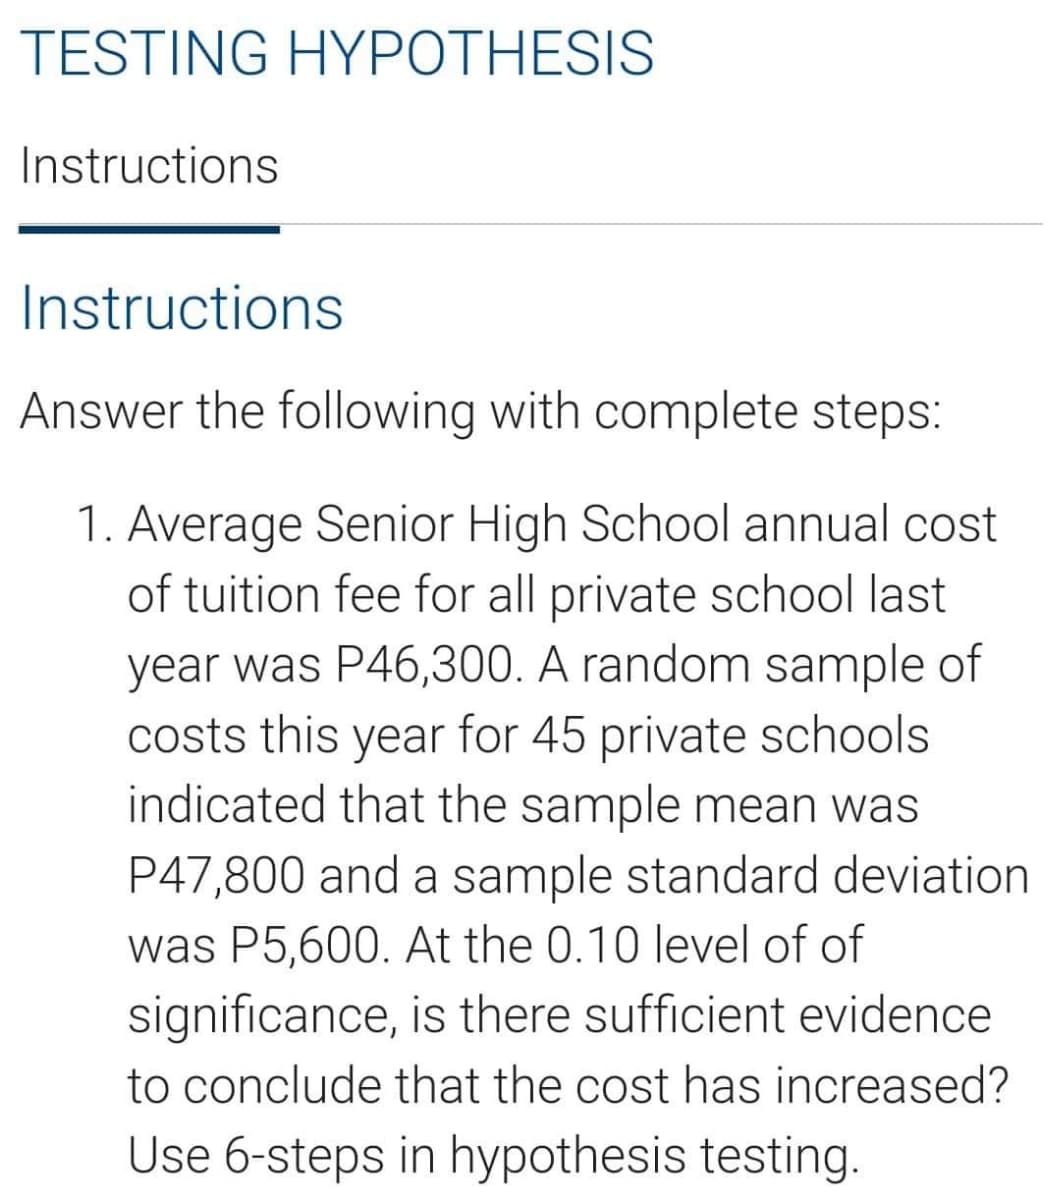 TESTING HYPOTHESIS
Instructions
Instructions
Answer the following with complete steps:
1. Average Senior High School annual cost
of tuition fee for all private school last
year was P46,300. A random sample of
costs this year for 45 private schools
indicated that the sample mean was
P47,800 and a sample standard deviation
was P5,600. At the 0.10 level of of
significance, is there sufficient evidence
to conclude that the cost has increased?
Use 6-steps in hypothesis testing.